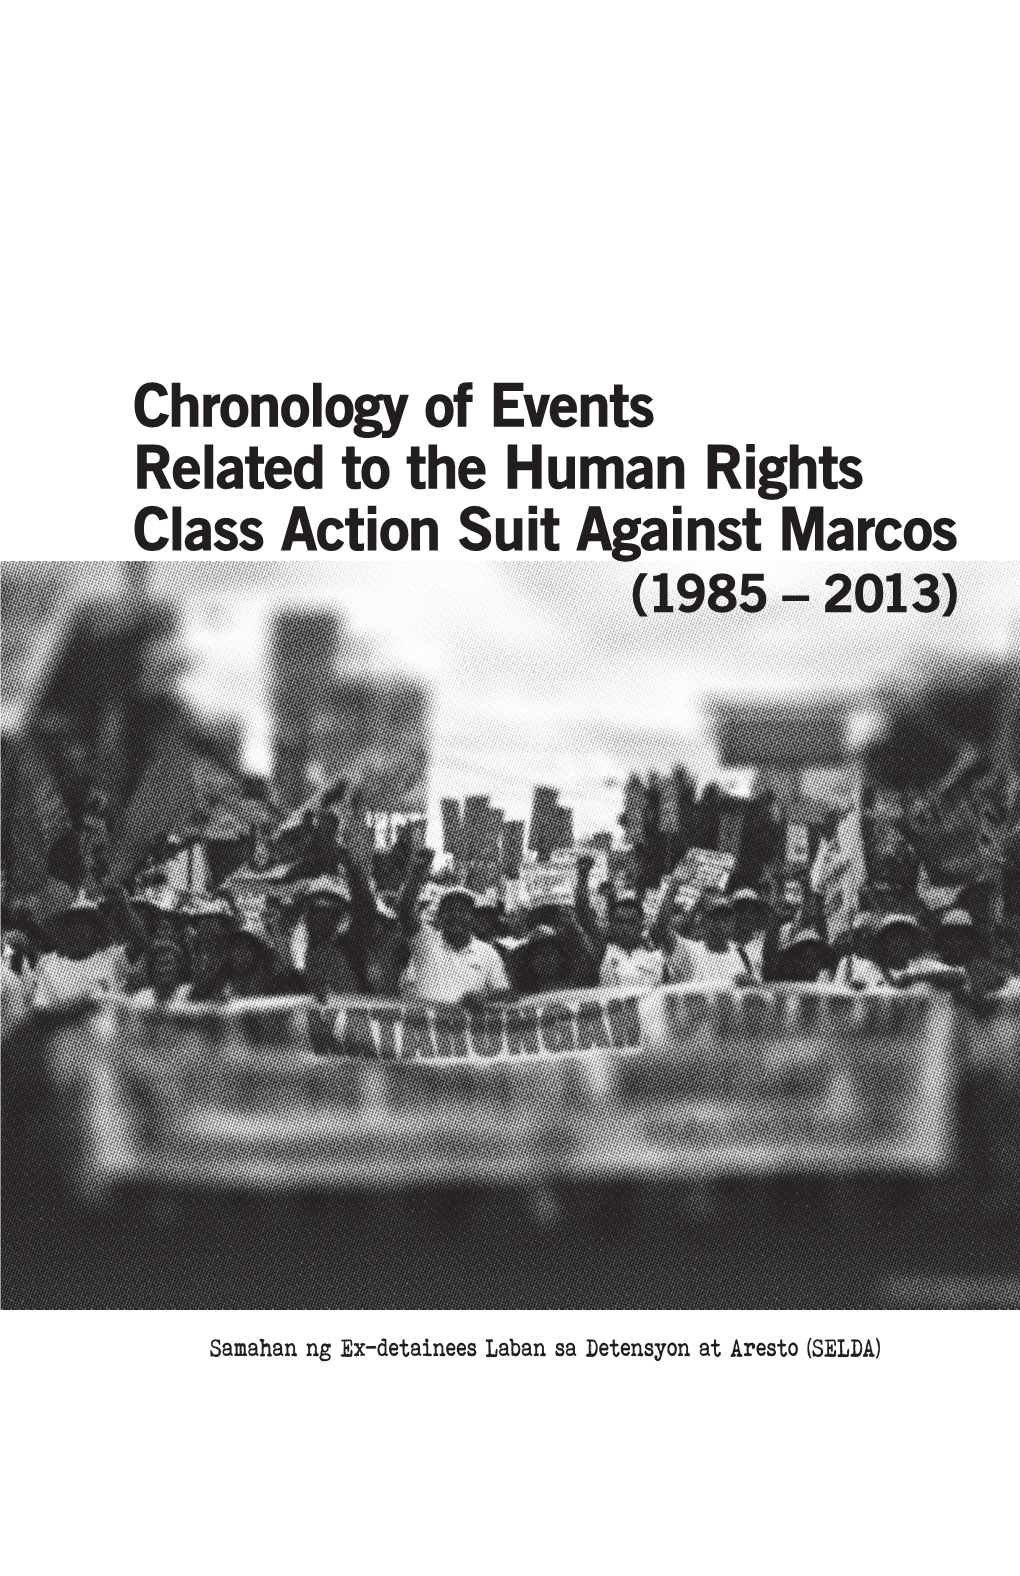 Chronology of Events Related to the Human Rights Class Action Suit Against Marcos (1985 – 2013)